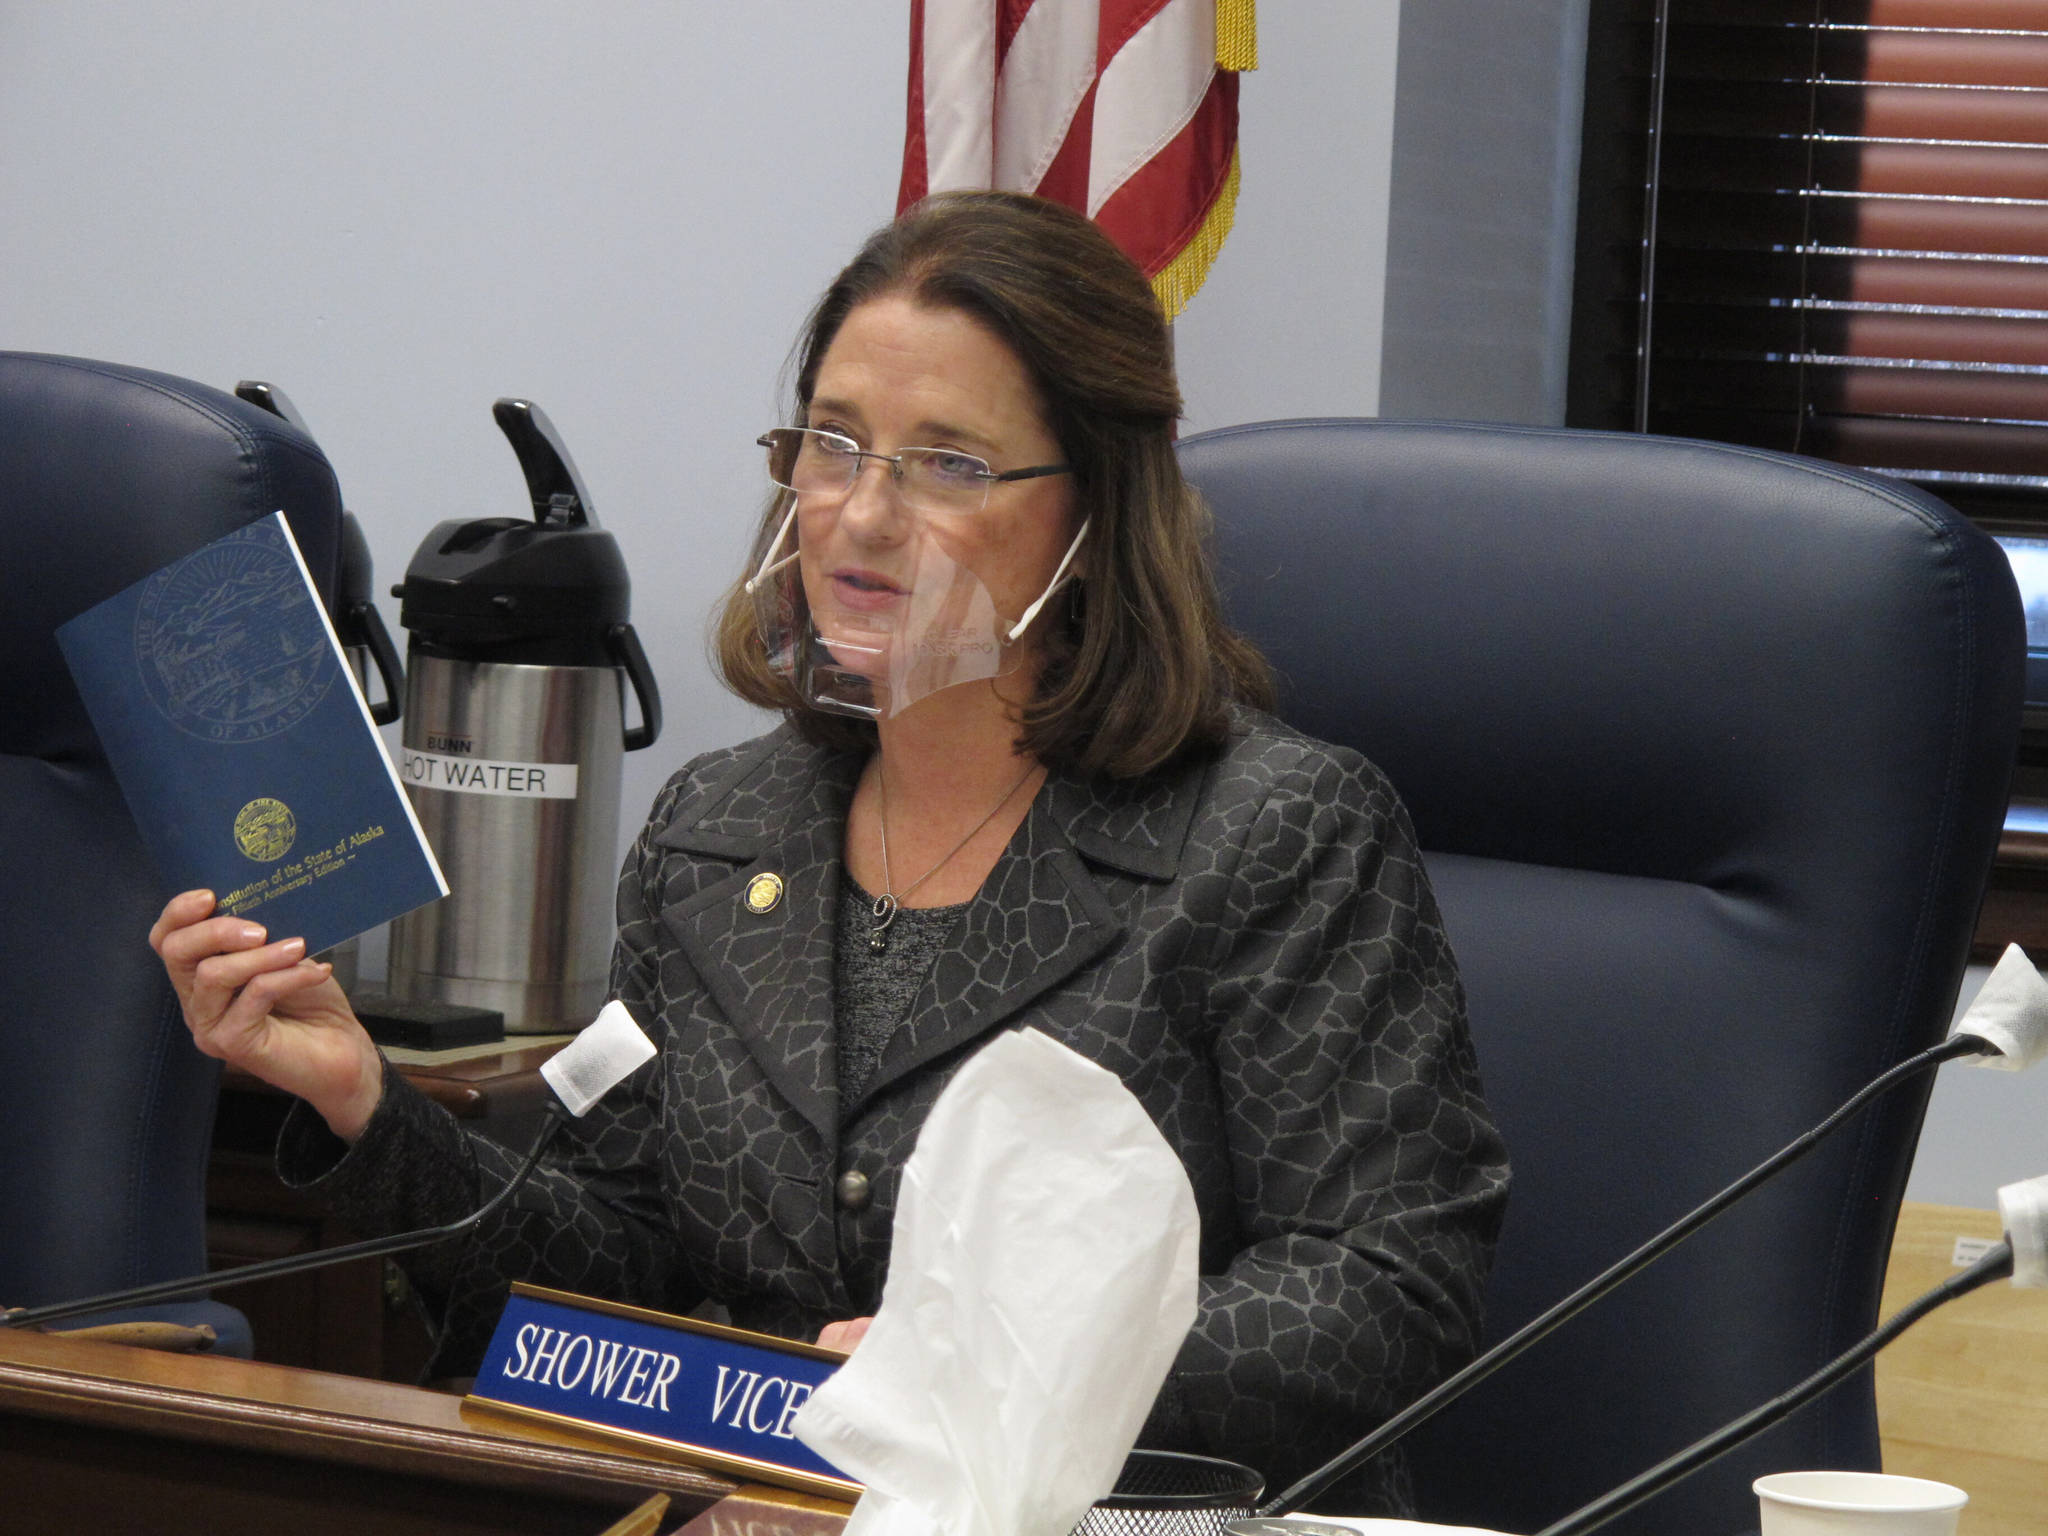 State Sen. Lora Reinbold, R-Eagle River, holds a copy of the Alaska Constitution during a committee hearing on Wednesday, Jan. 27, 2021. Gov. Mike Dunleavy, a Republican, sent Reinbold a letter on Feb. 18, 2021, saying she has used her position to “misrepresent” the state’s COVID-19 response. Reinbold said the letter was “full of baseless accusations and complaints.” (AP Photo / Becky Bohrer)